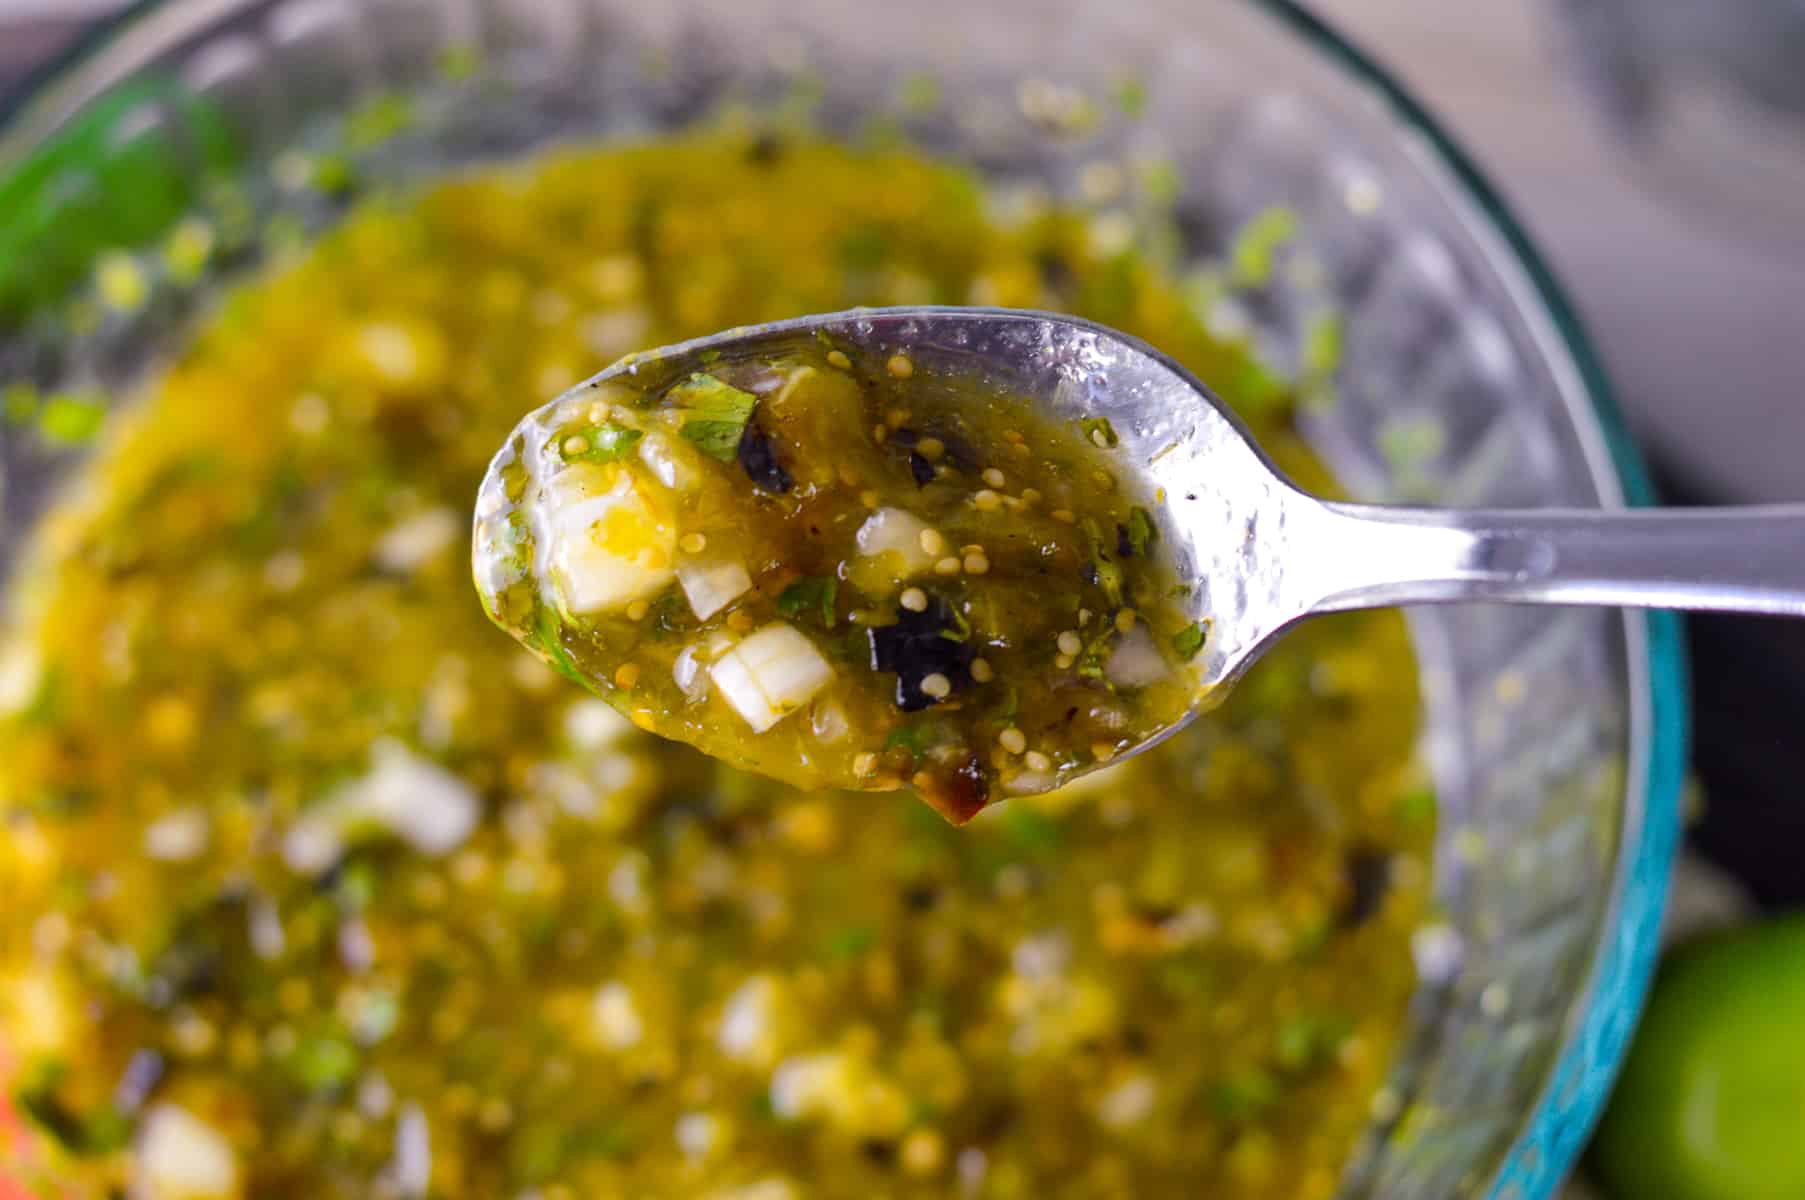 Close up view of salsa verde on silver spoon with glass bowl of salsa verde in background 